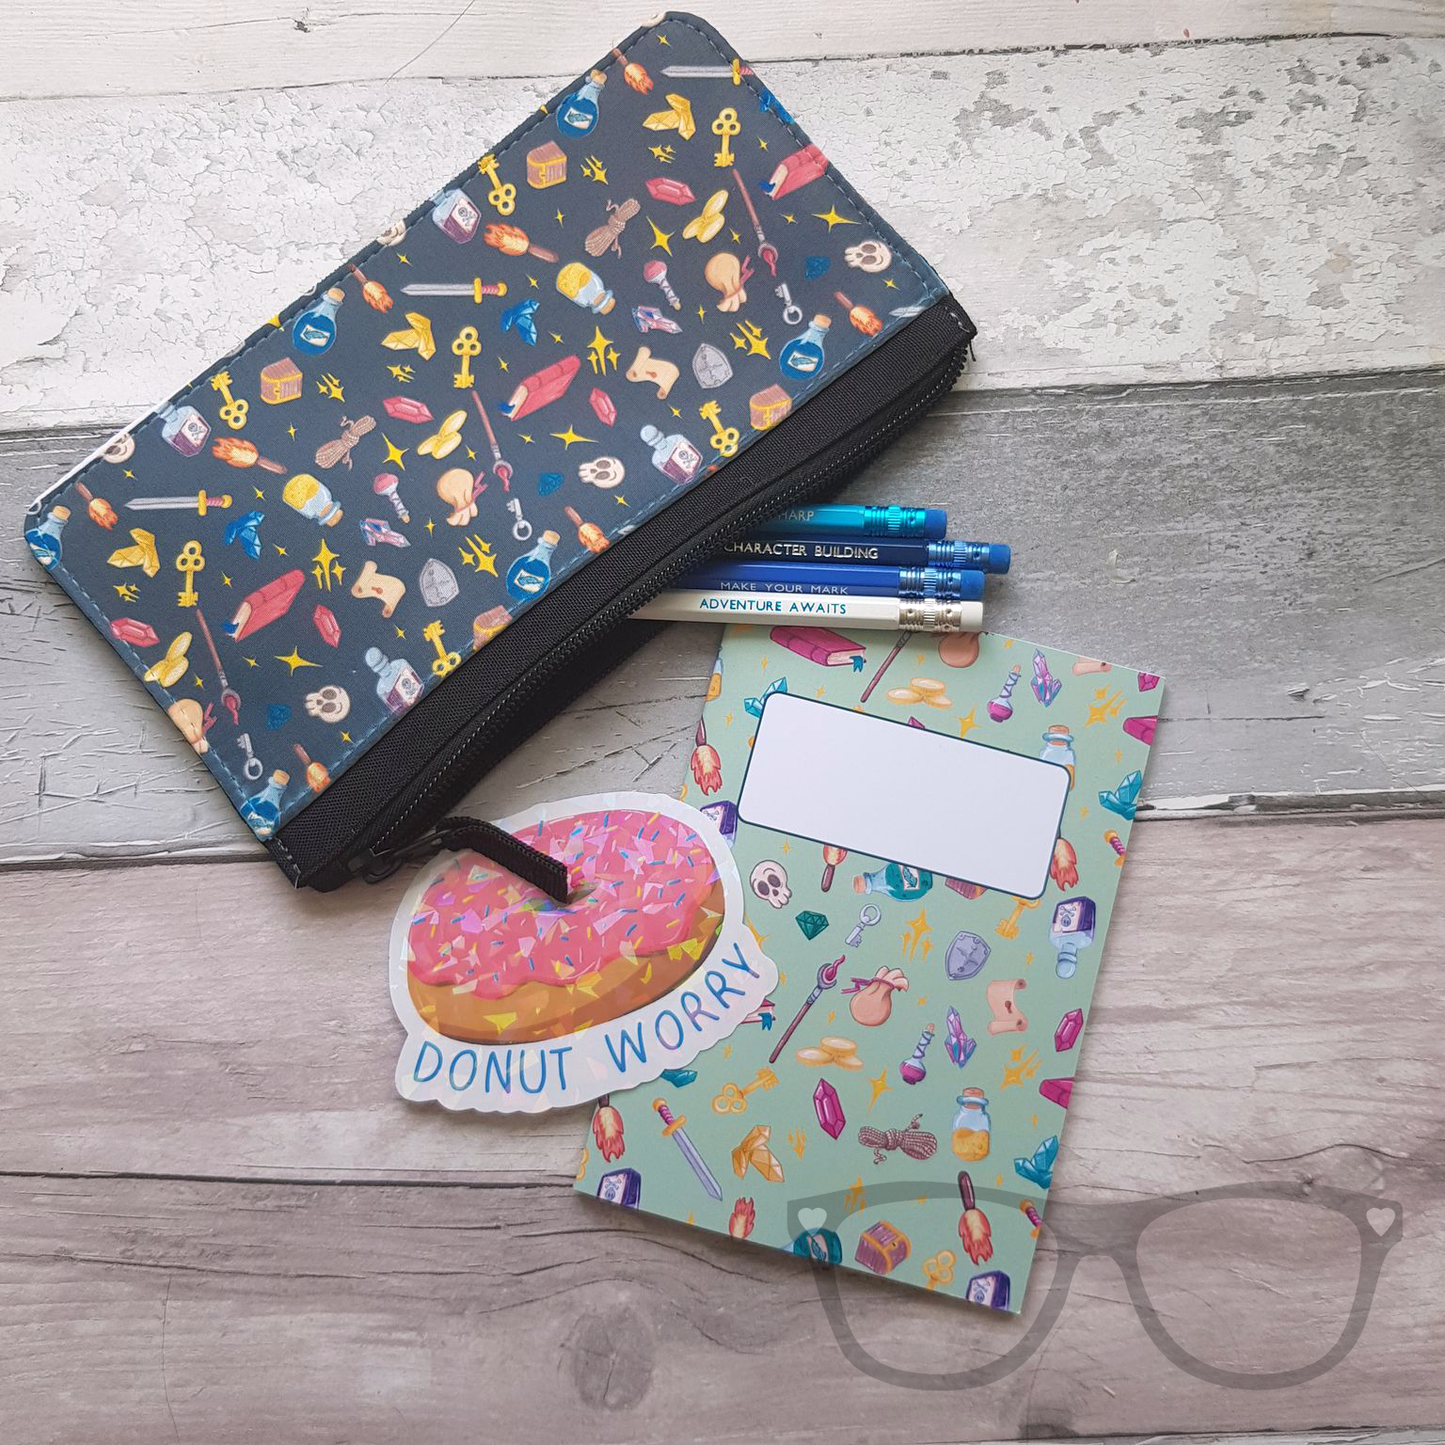 Zipped pencil case for school, college or university featuring a Fantasy genre pattern on a teal background. Shown with a range of stationery including pencils, a notebook and a sparkly donut sticker that reads "Donut Worry"